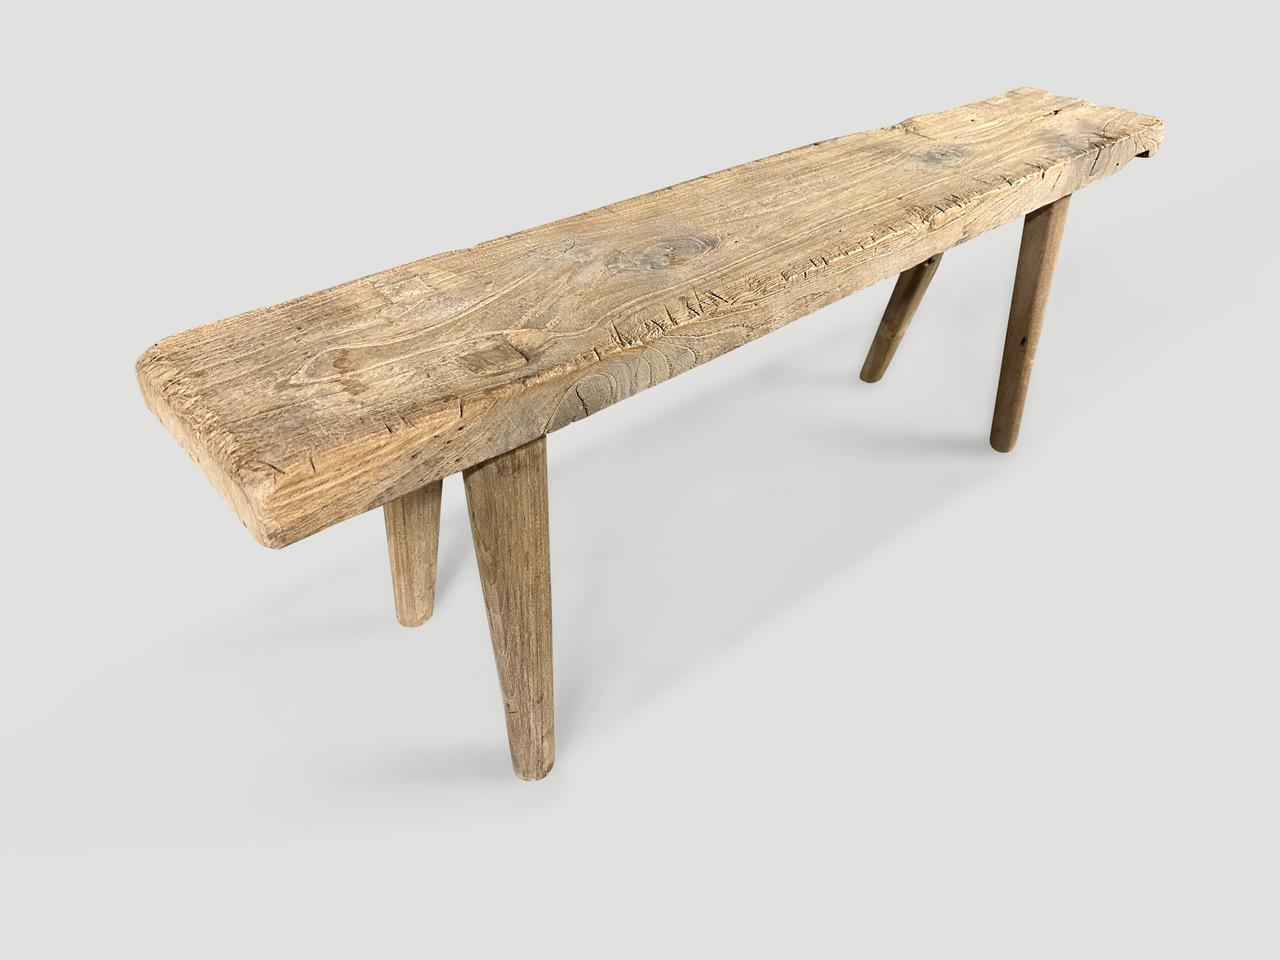 A single thick antique wood panel with lovely character. We added smooth teak minimalist legs to produce this beautiful bench and finished with our secret ingredient, revealing the unique wood grain. It’s all in the details.

This bench was handmade